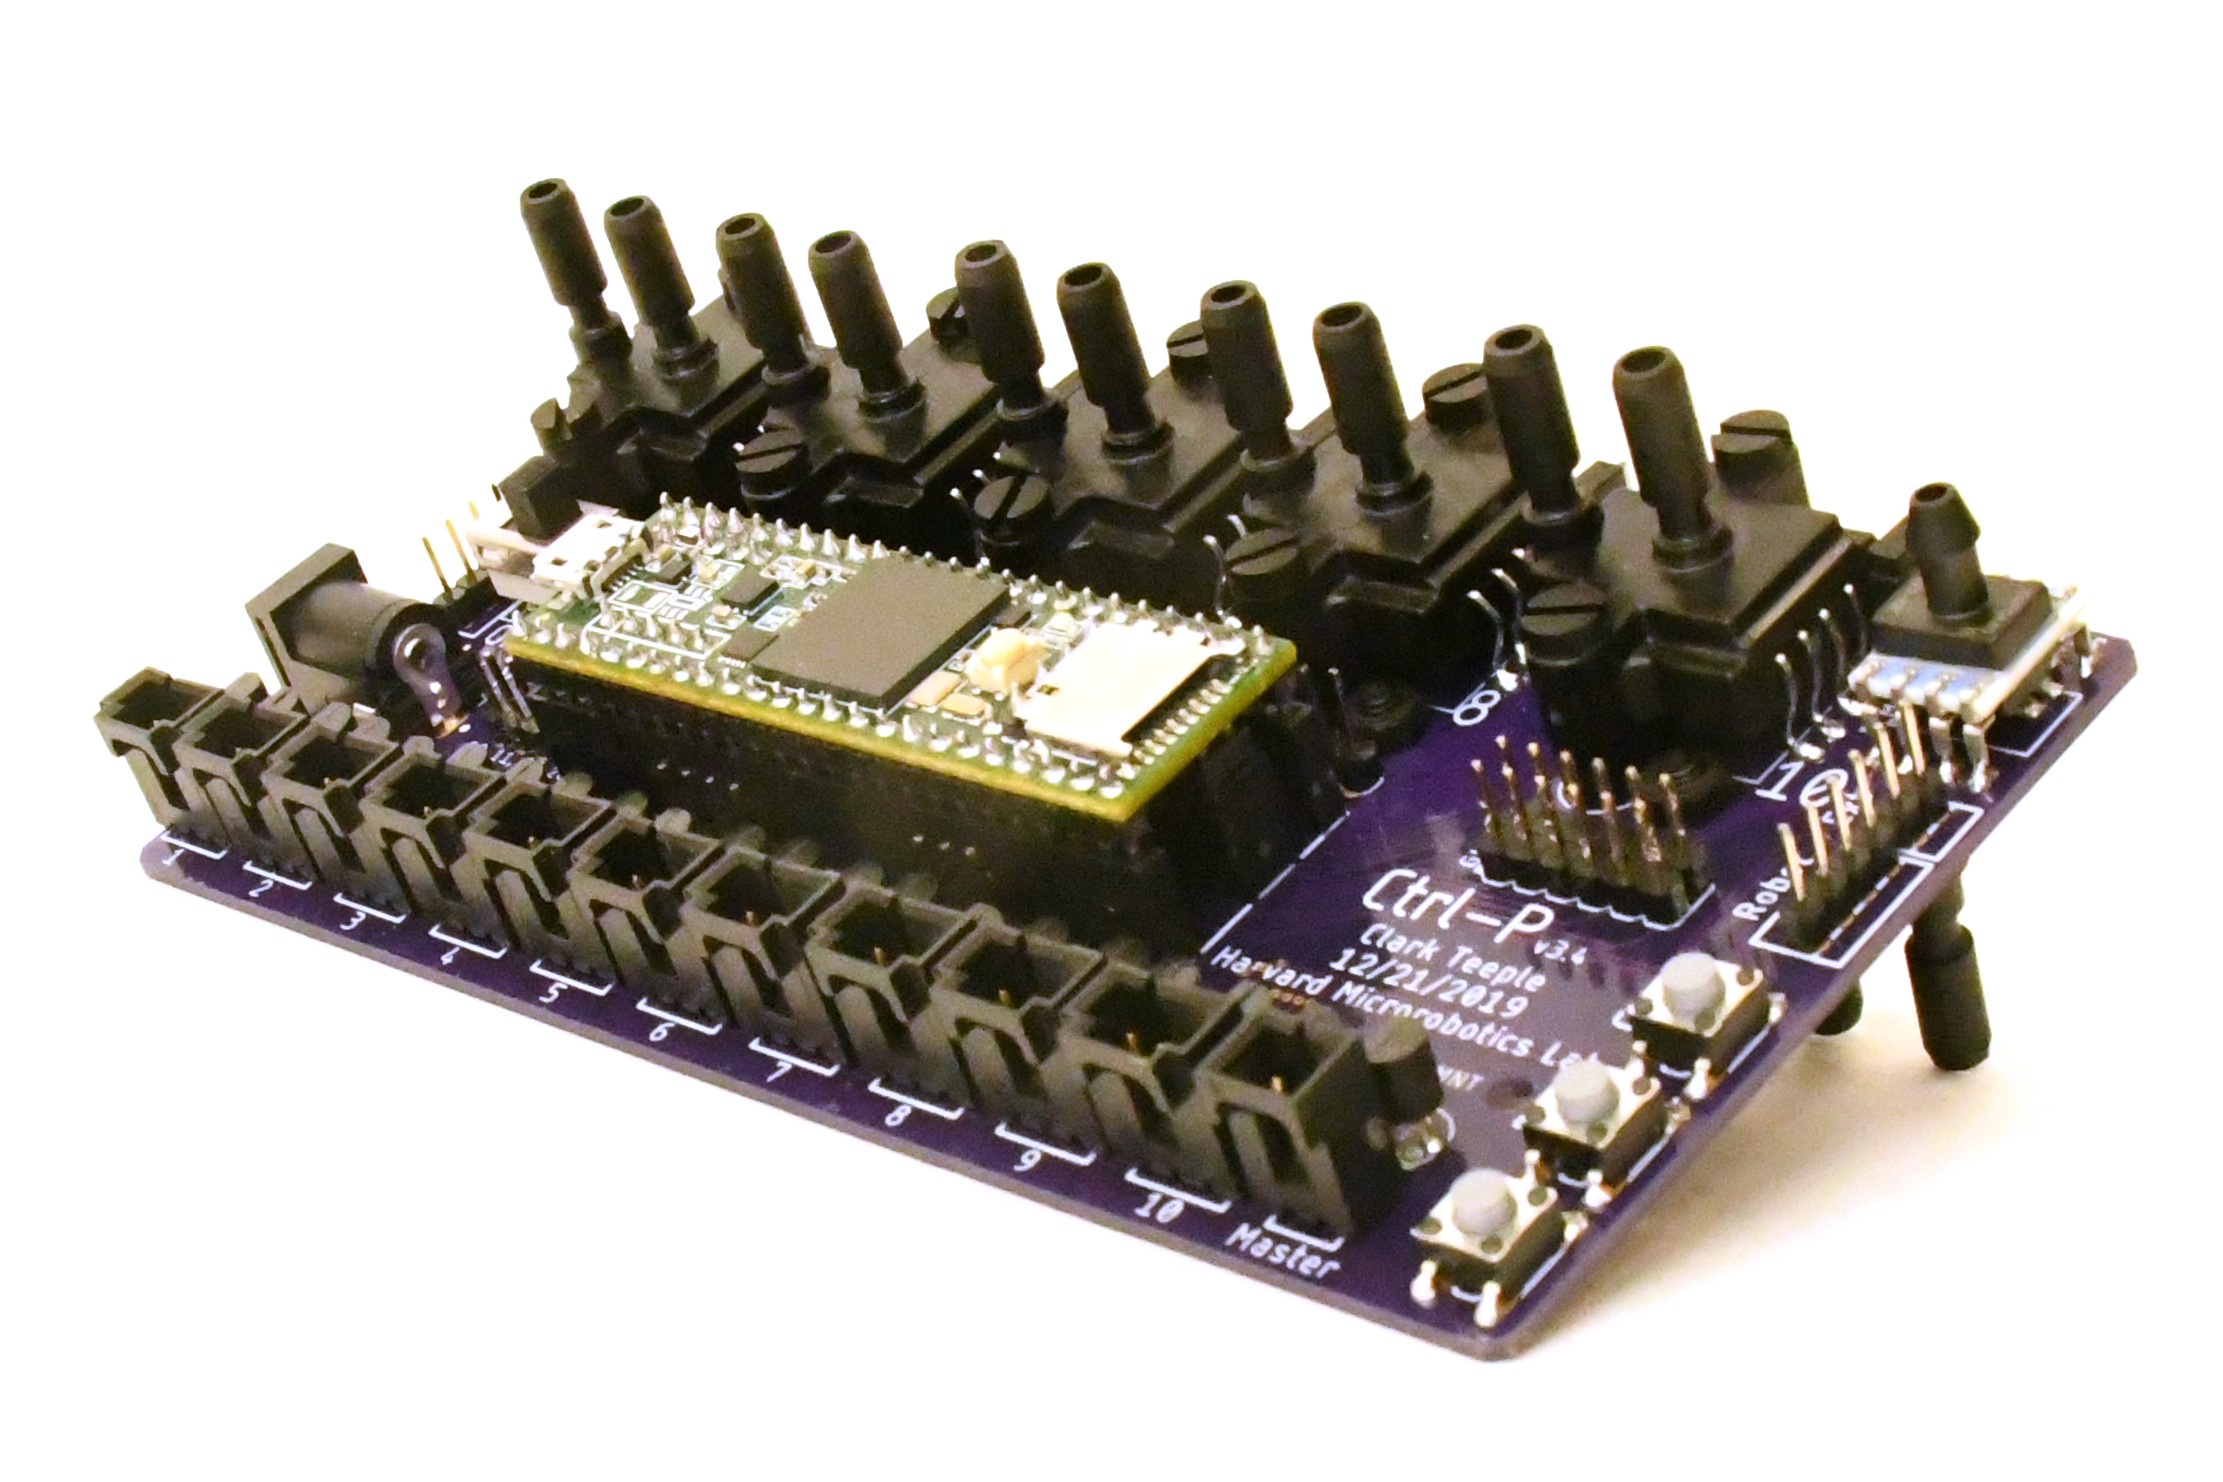 The populated PCB (version 3.4)